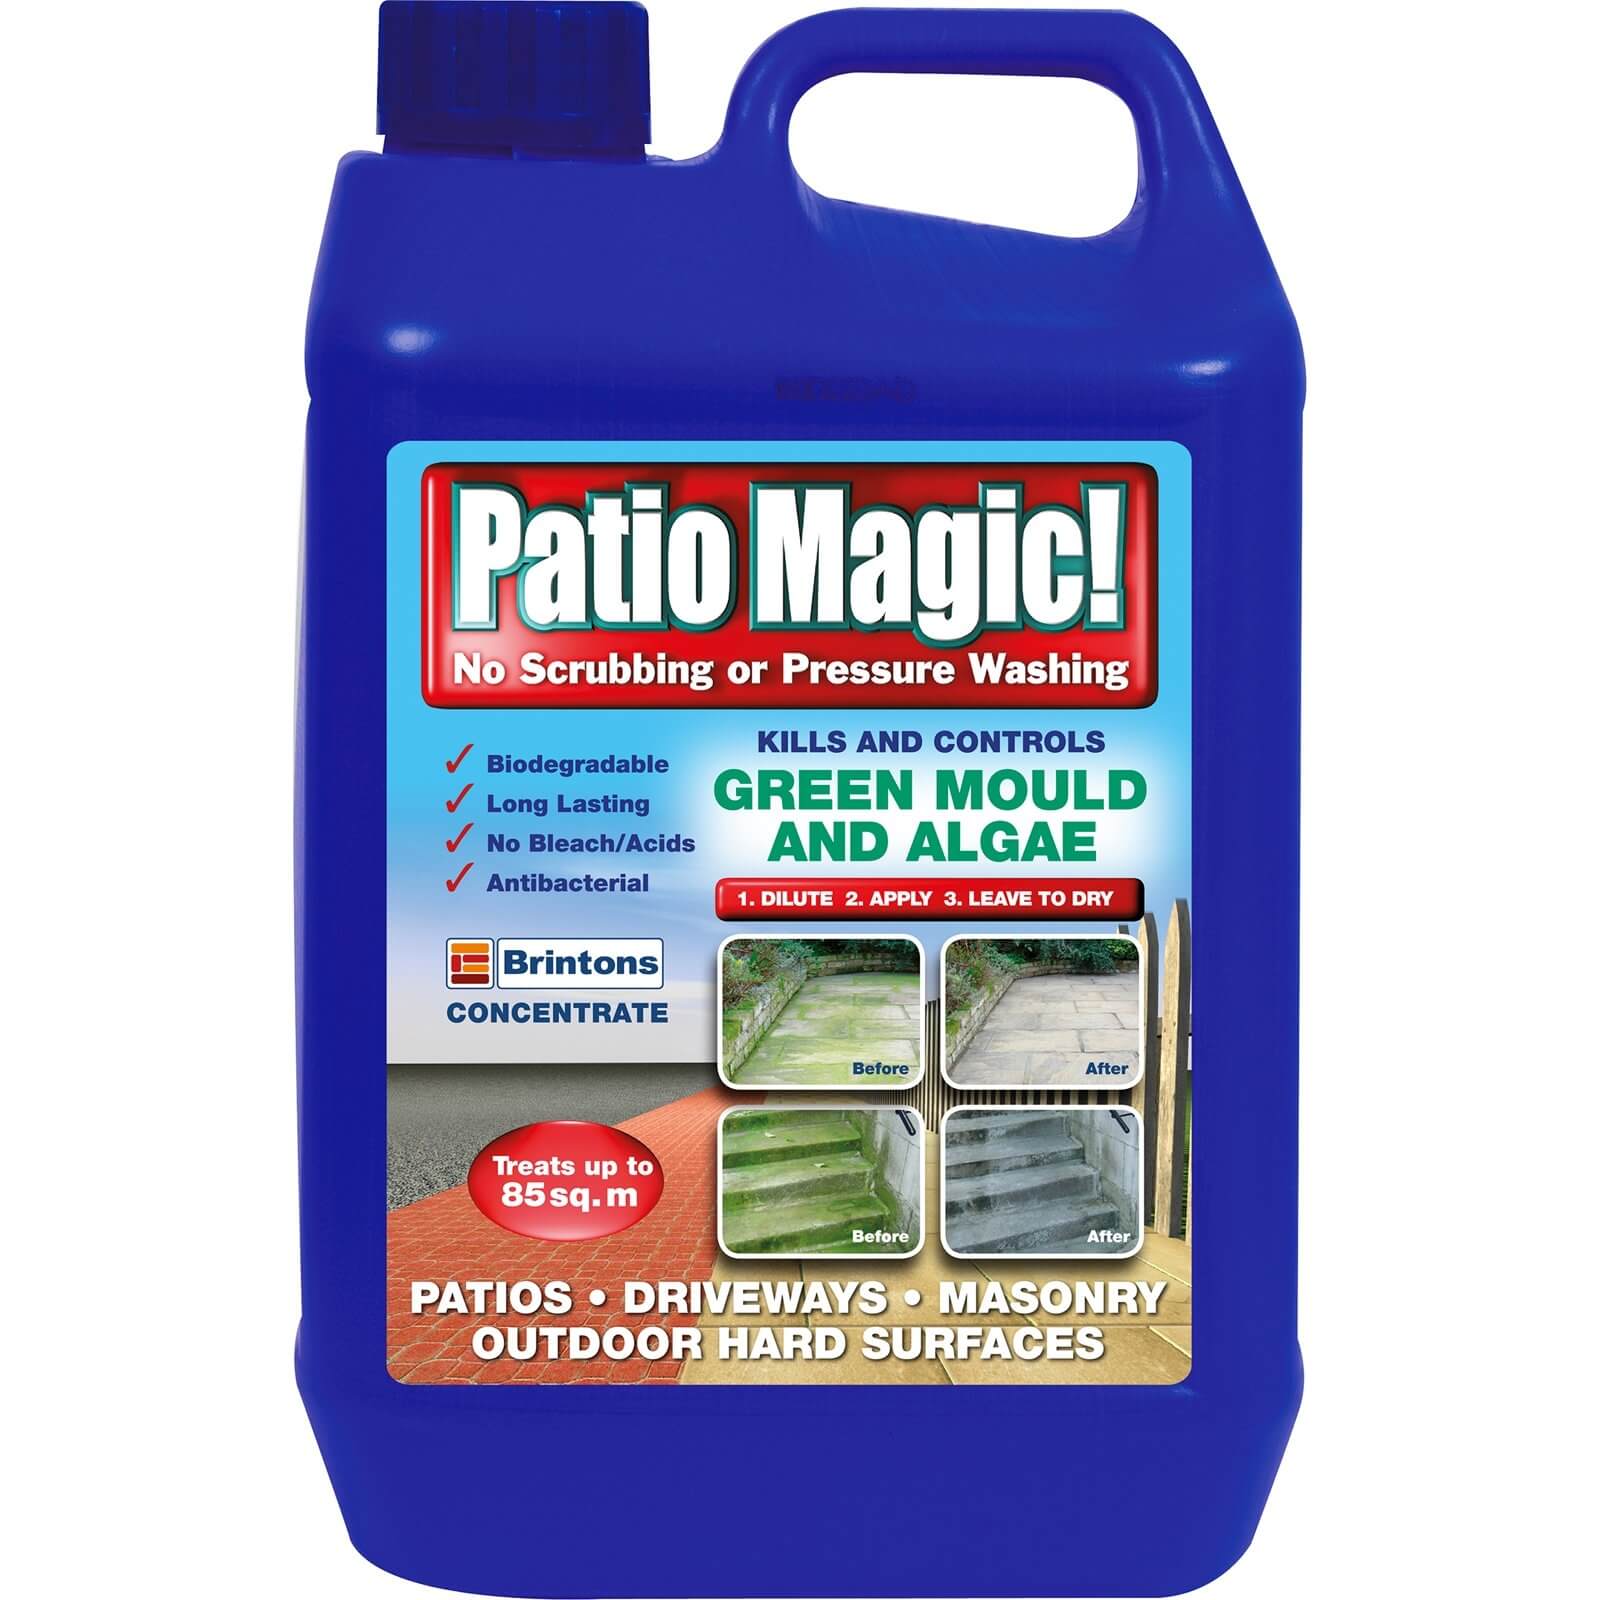 Patio Magic! Hard Surface Cleaner - 2.5L